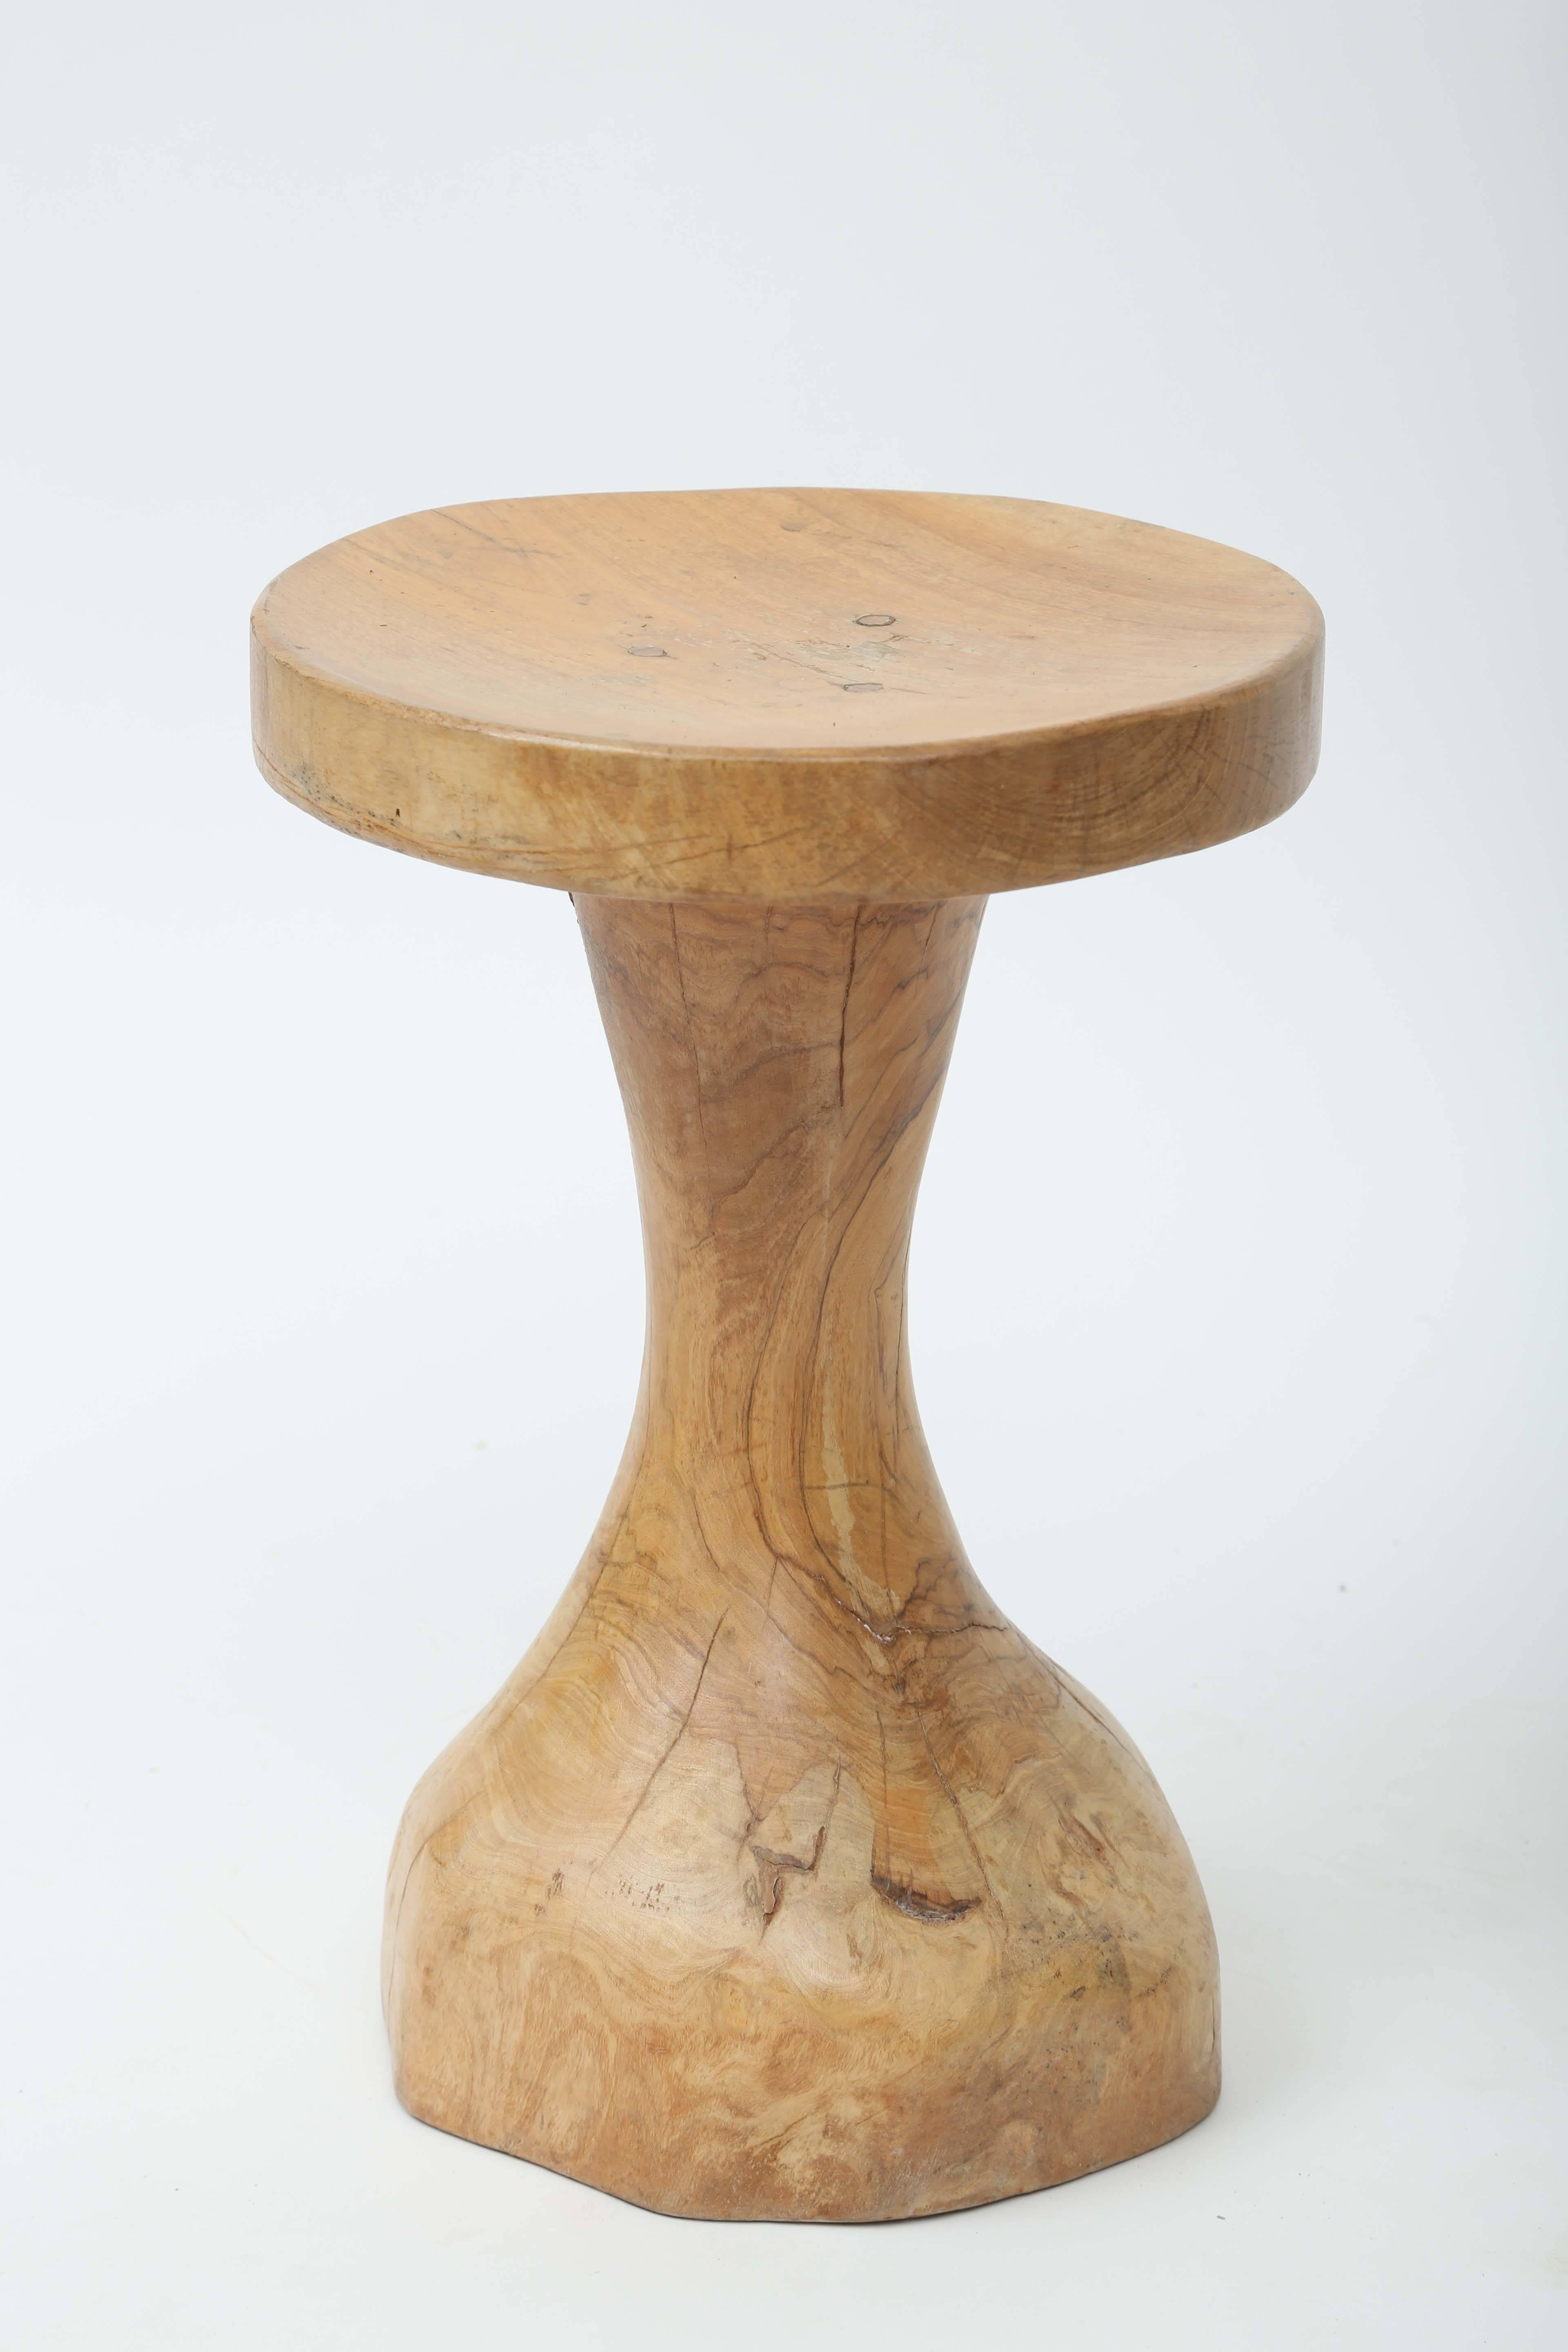 Hand-carved stool, sold through Laverne Galleries in Miami.